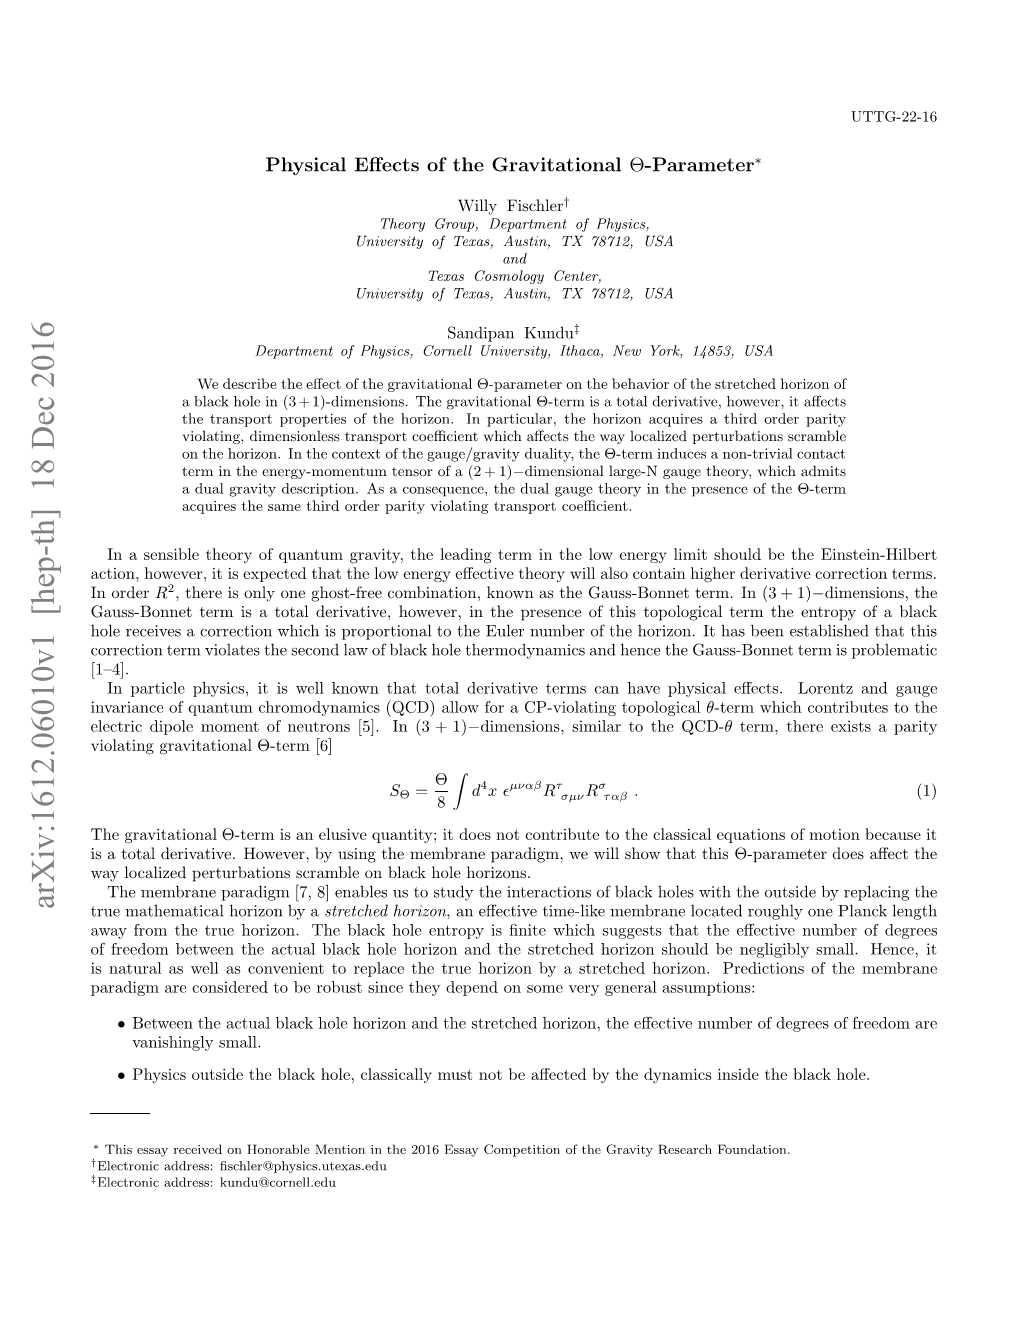 Physical Effects of the Gravitational Θ-Parameter